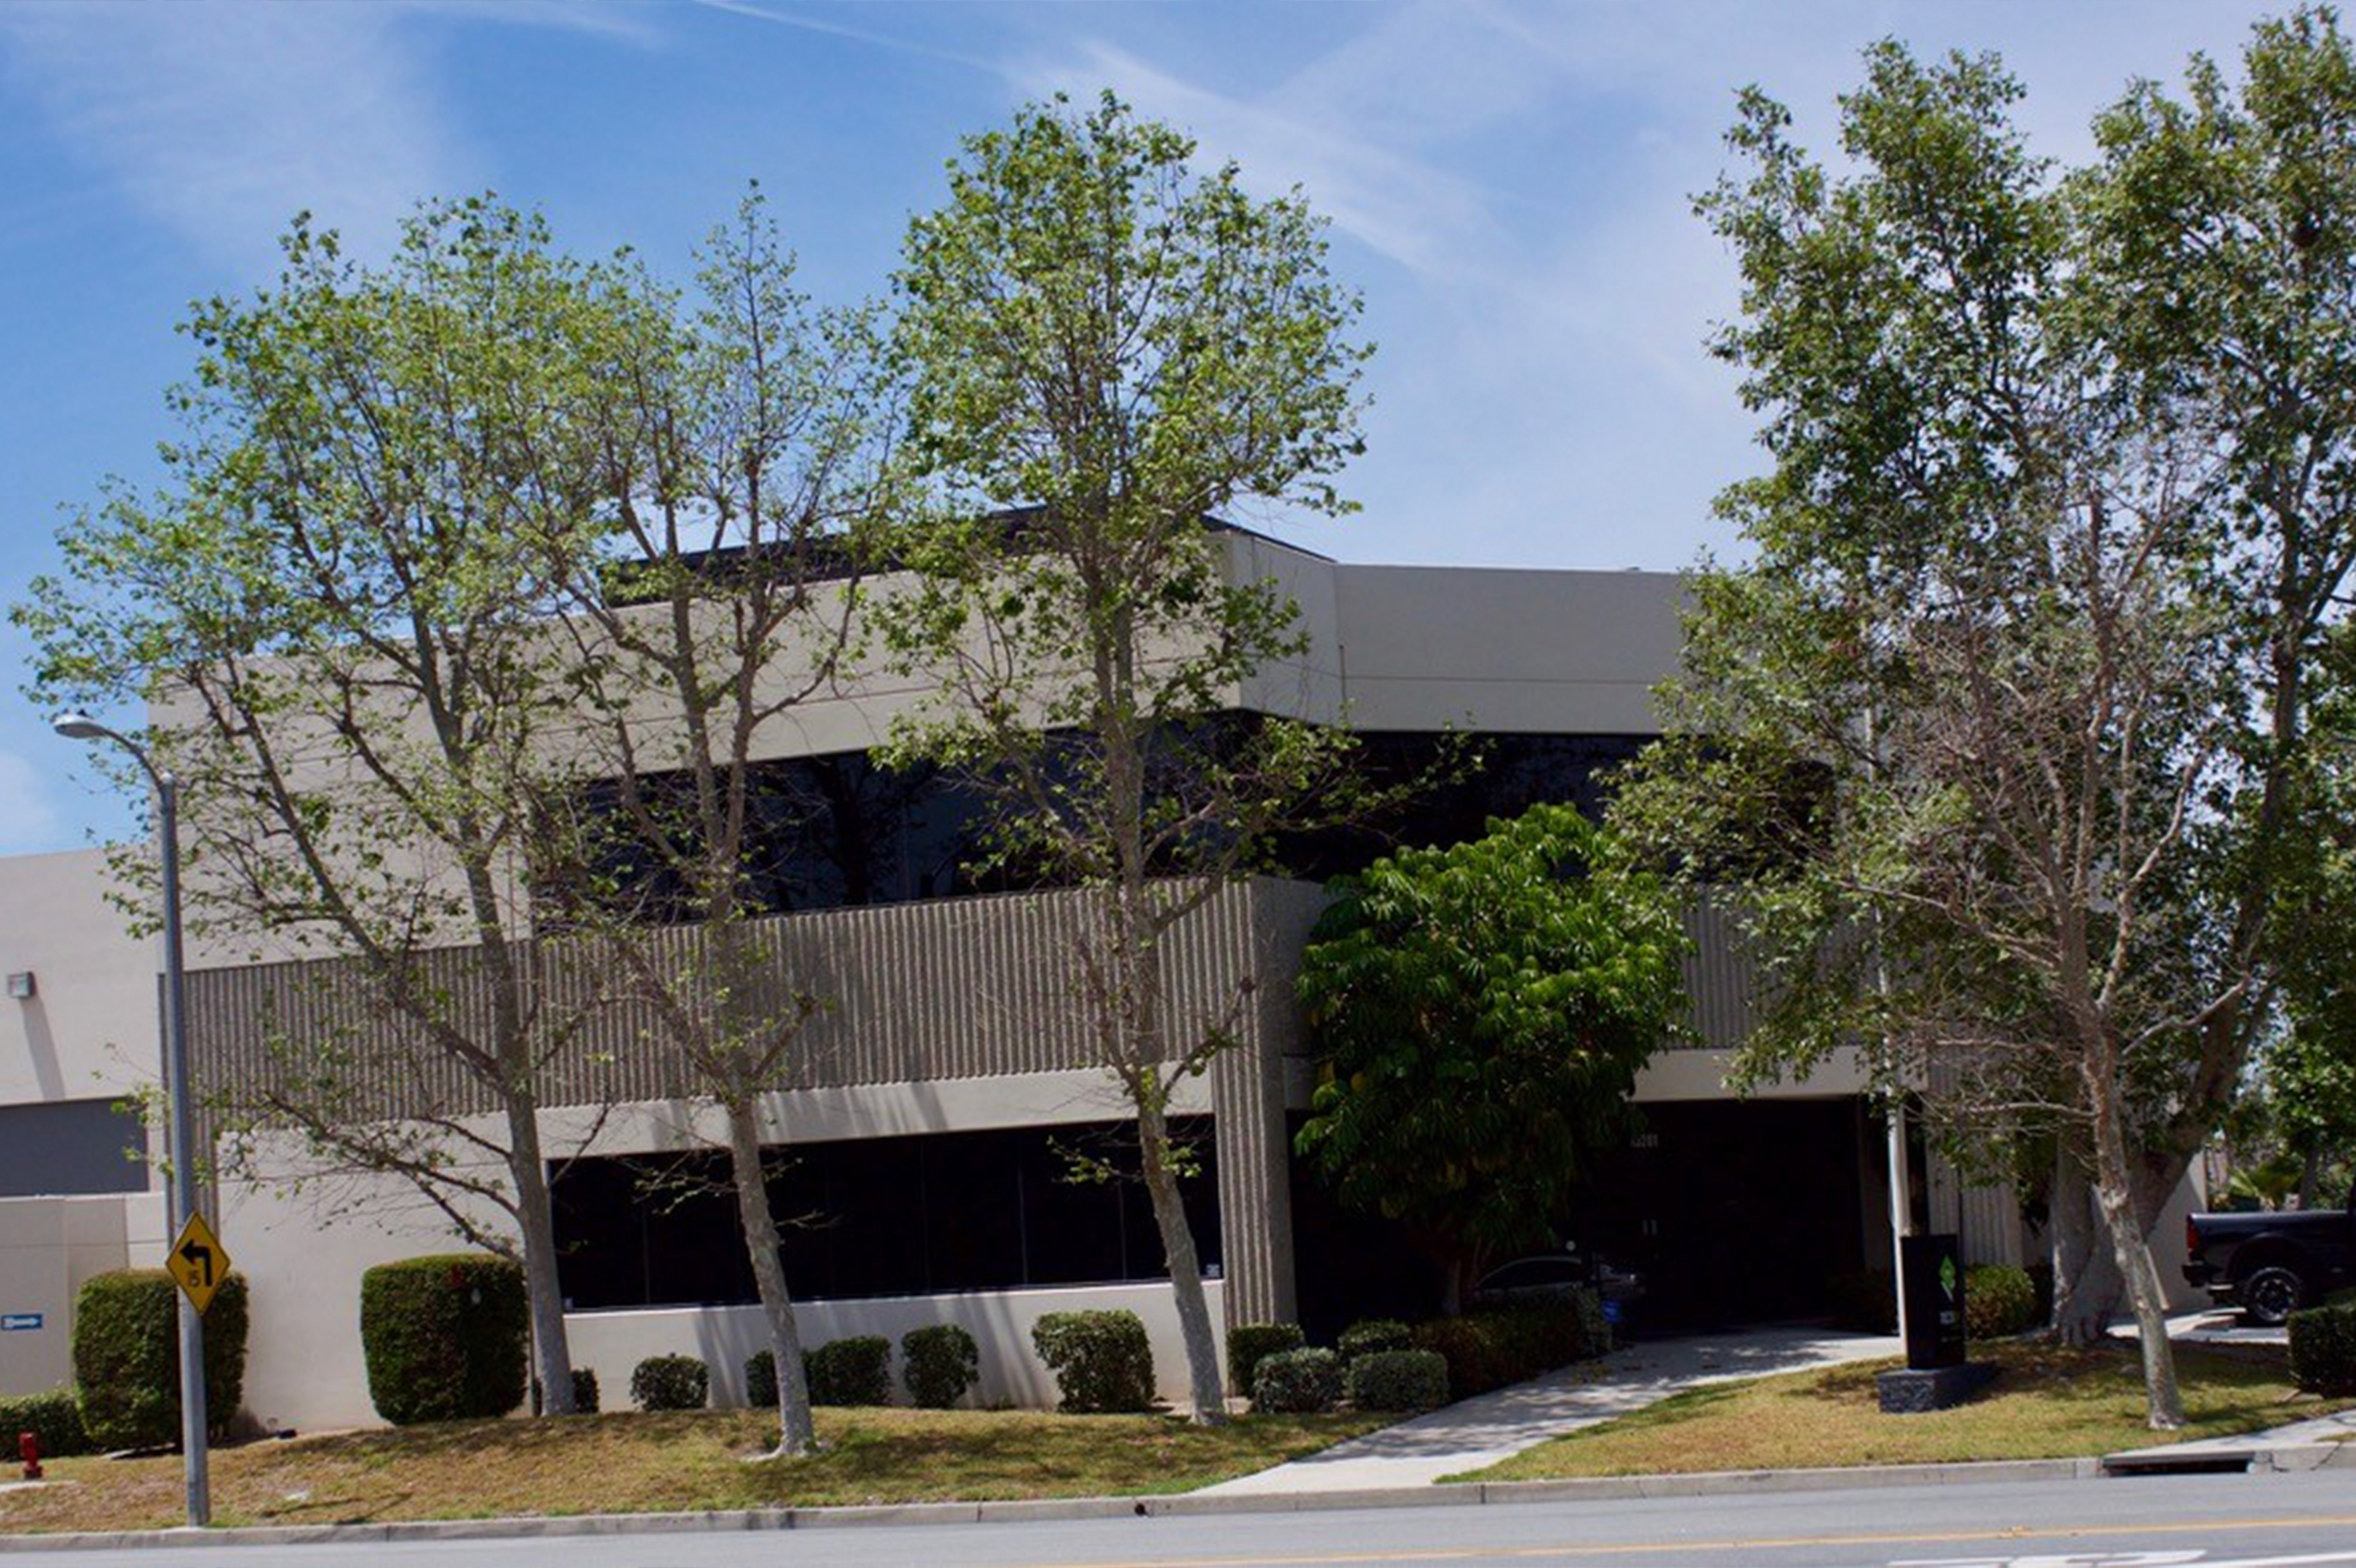 SENTRE Sells Primely Located Industrial Property in Tustin, Calif. for $11.4M